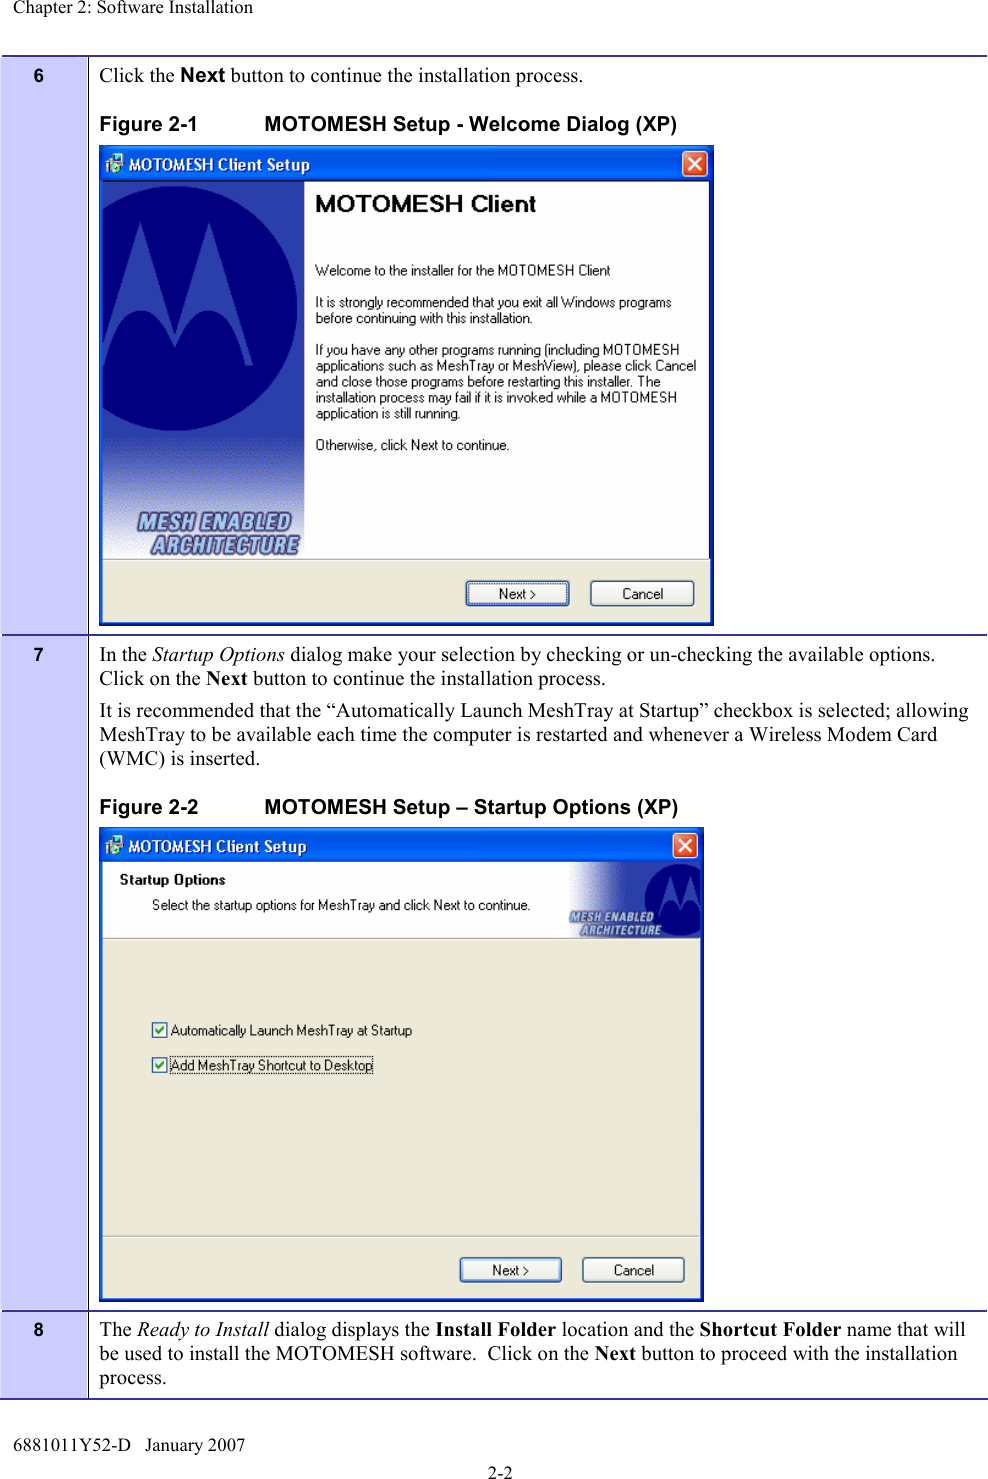 Chapter 2: Software Installation 6881011Y52-D   January 2007 2-2 6  Click the Next button to continue the installation process. Figure 2-1  MOTOMESH Setup - Welcome Dialog (XP)  7  In the Startup Options dialog make your selection by checking or un-checking the available options.  Click on the Next button to continue the installation process. It is recommended that the “Automatically Launch MeshTray at Startup” checkbox is selected; allowing MeshTray to be available each time the computer is restarted and whenever a Wireless Modem Card (WMC) is inserted. Figure 2-2  MOTOMESH Setup – Startup Options (XP)  8  The Ready to Install dialog displays the Install Folder location and the Shortcut Folder name that will be used to install the MOTOMESH software.  Click on the Next button to proceed with the installation process.   